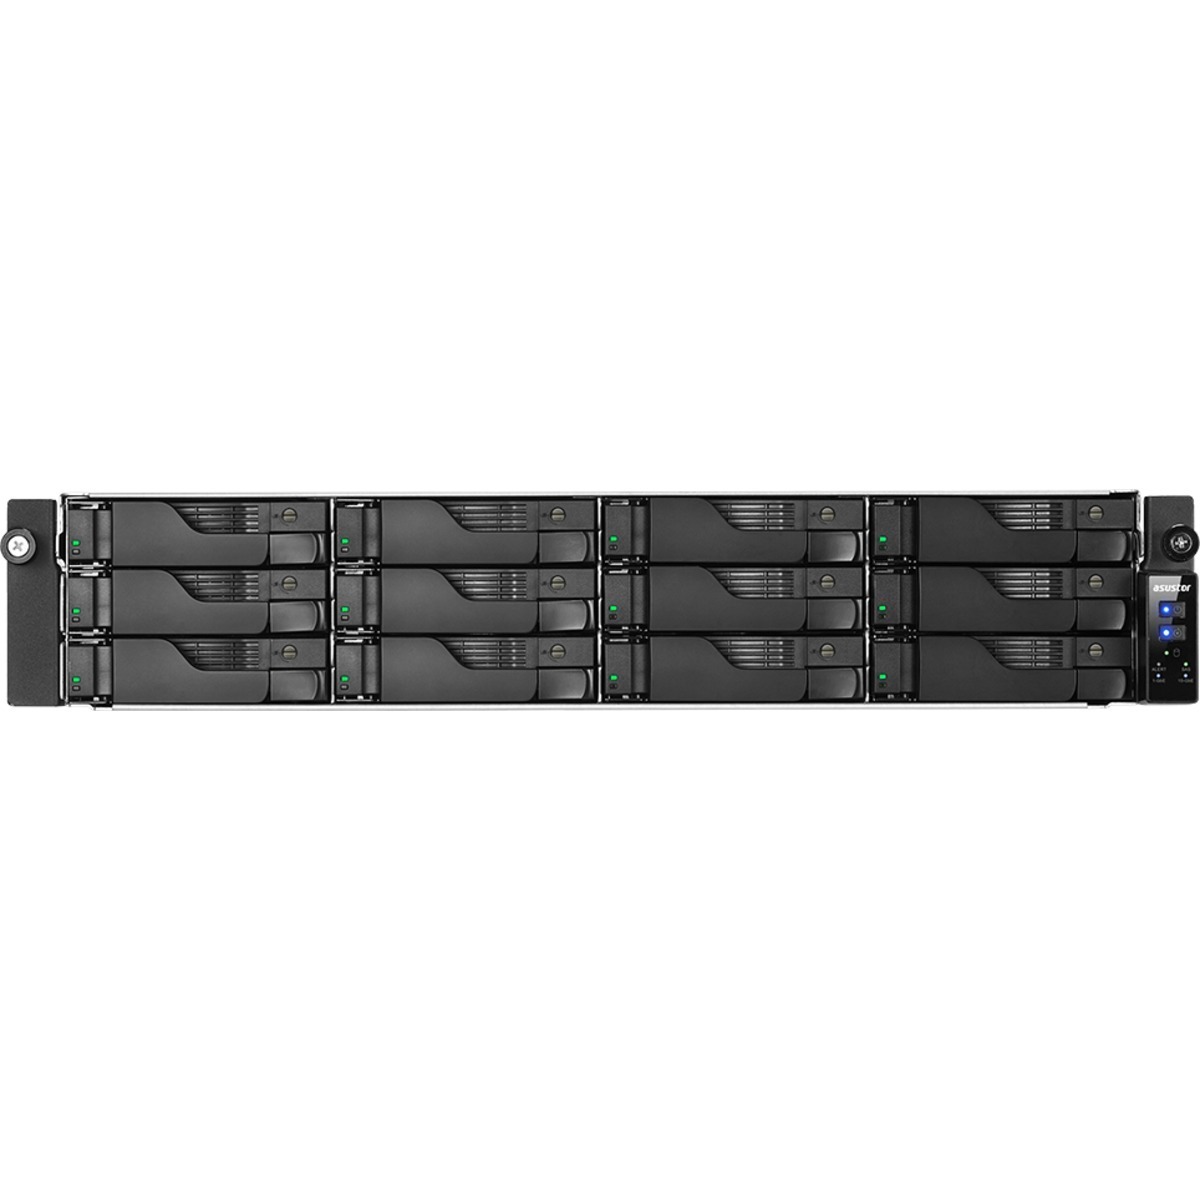 ASUSTOR AS7112RDX Lockerstor 12R Pro 22tb 12-Bay RackMount Large Business / Enterprise NAS - Network Attached Storage Device 11x2tb Sandisk Ultra 3D SDSSDH3-2T00 2.5 560/520MB/s SATA 6Gb/s SSD CONSUMER Class Drives Installed - Burn-In Tested AS7112RDX Lockerstor 12R Pro